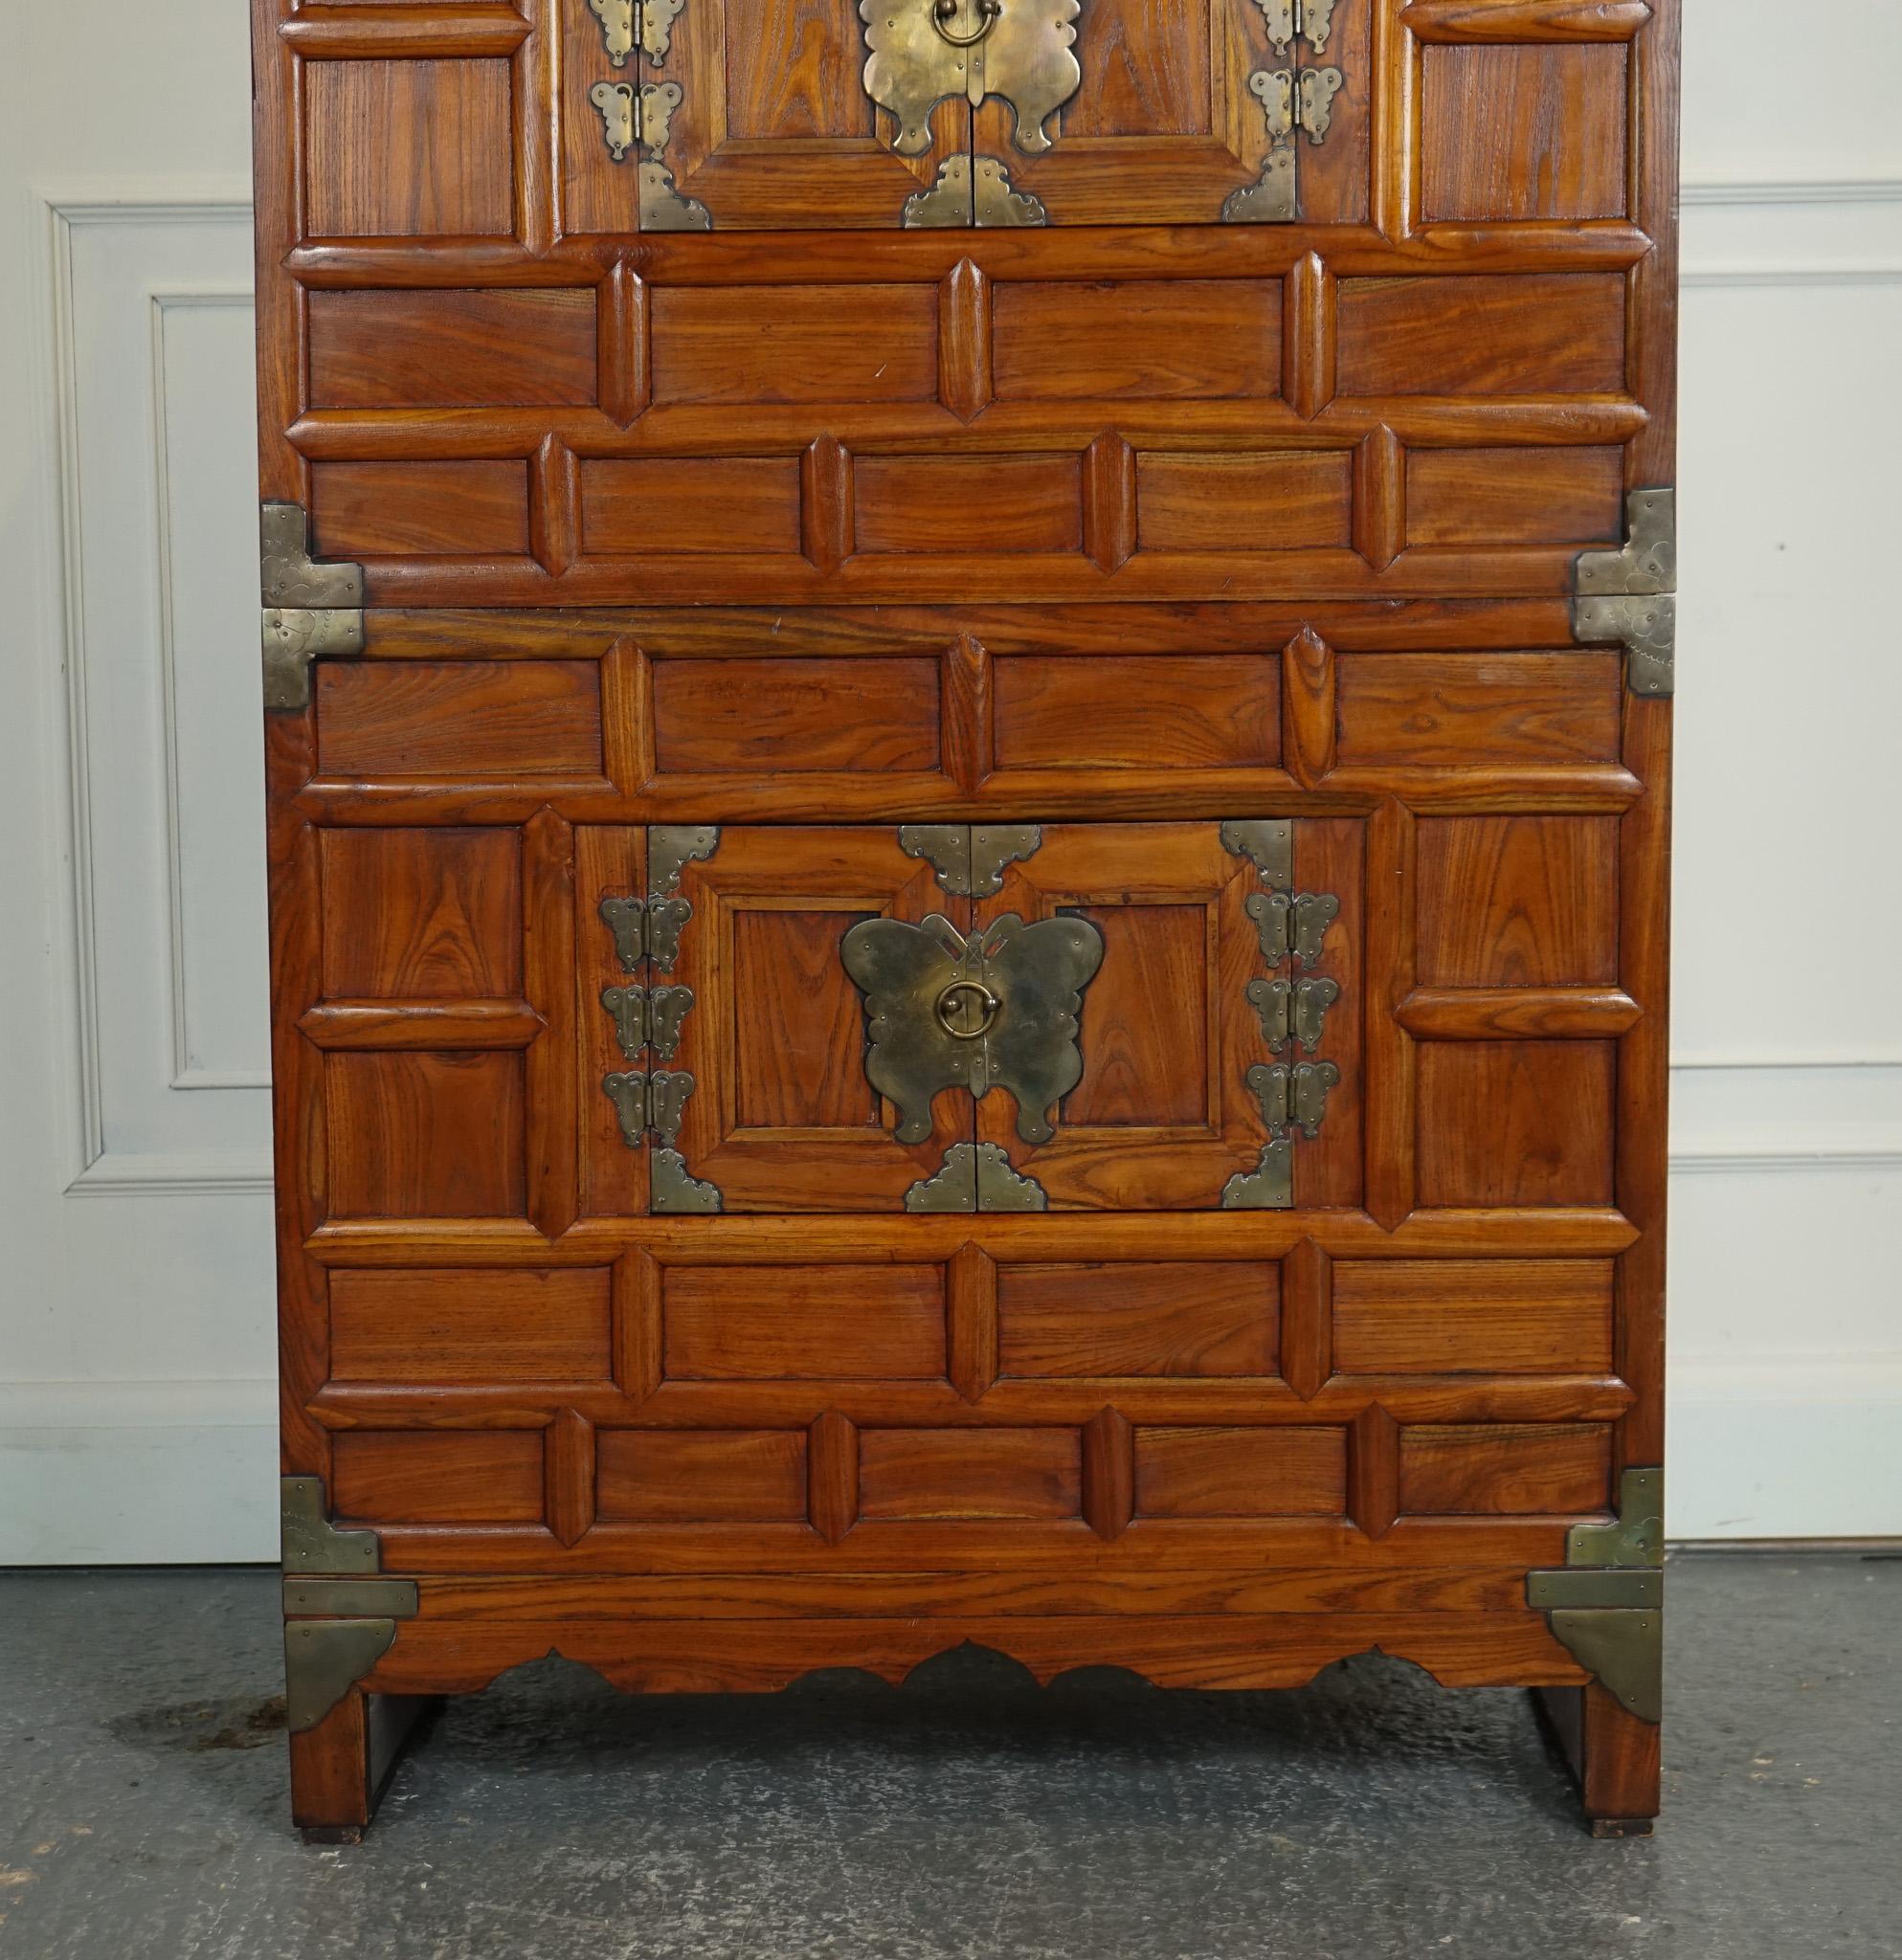 LATE 19TH CENTRY KOREAN ICH'UNG BUTTERFLY WEDDING CABINET CHEST BRASS FITiNGS J1 In Good Condition For Sale In Pulborough, GB